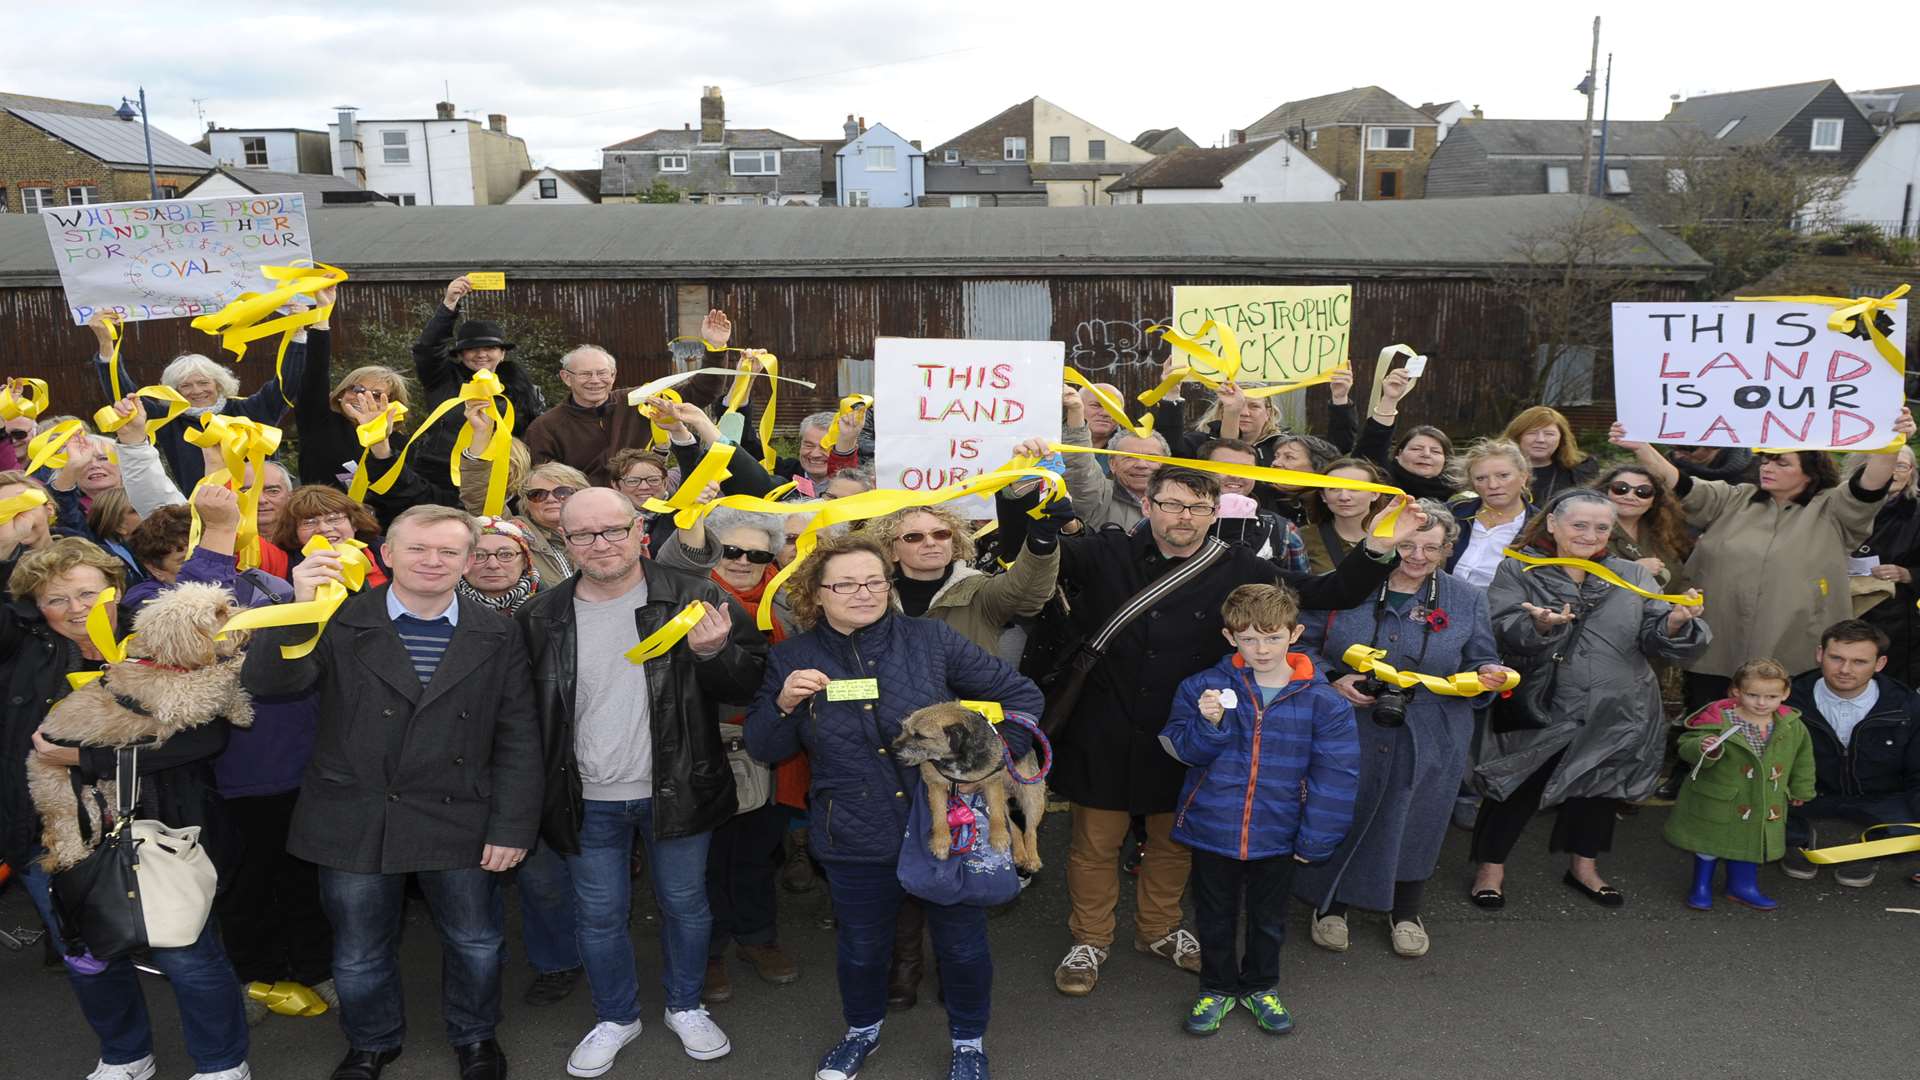 Campaigners tied yellow ribbons around the Oval Chalet site